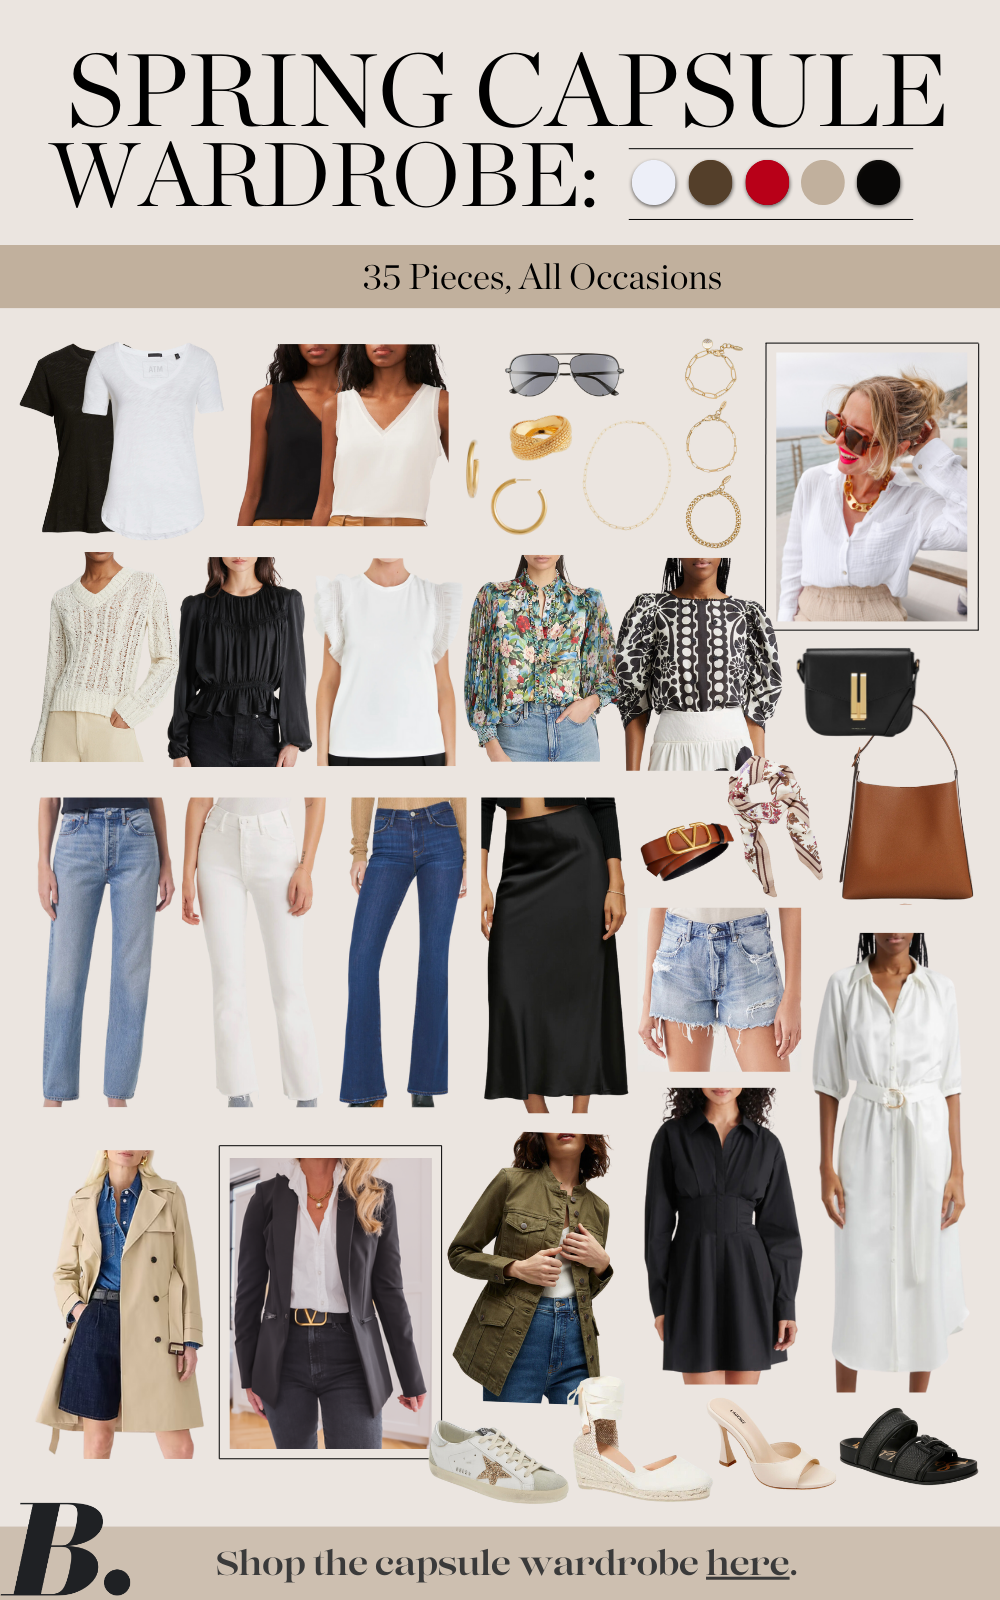 Be Super Stylish with This Gorgeous Spring Capsule Wardrobe!